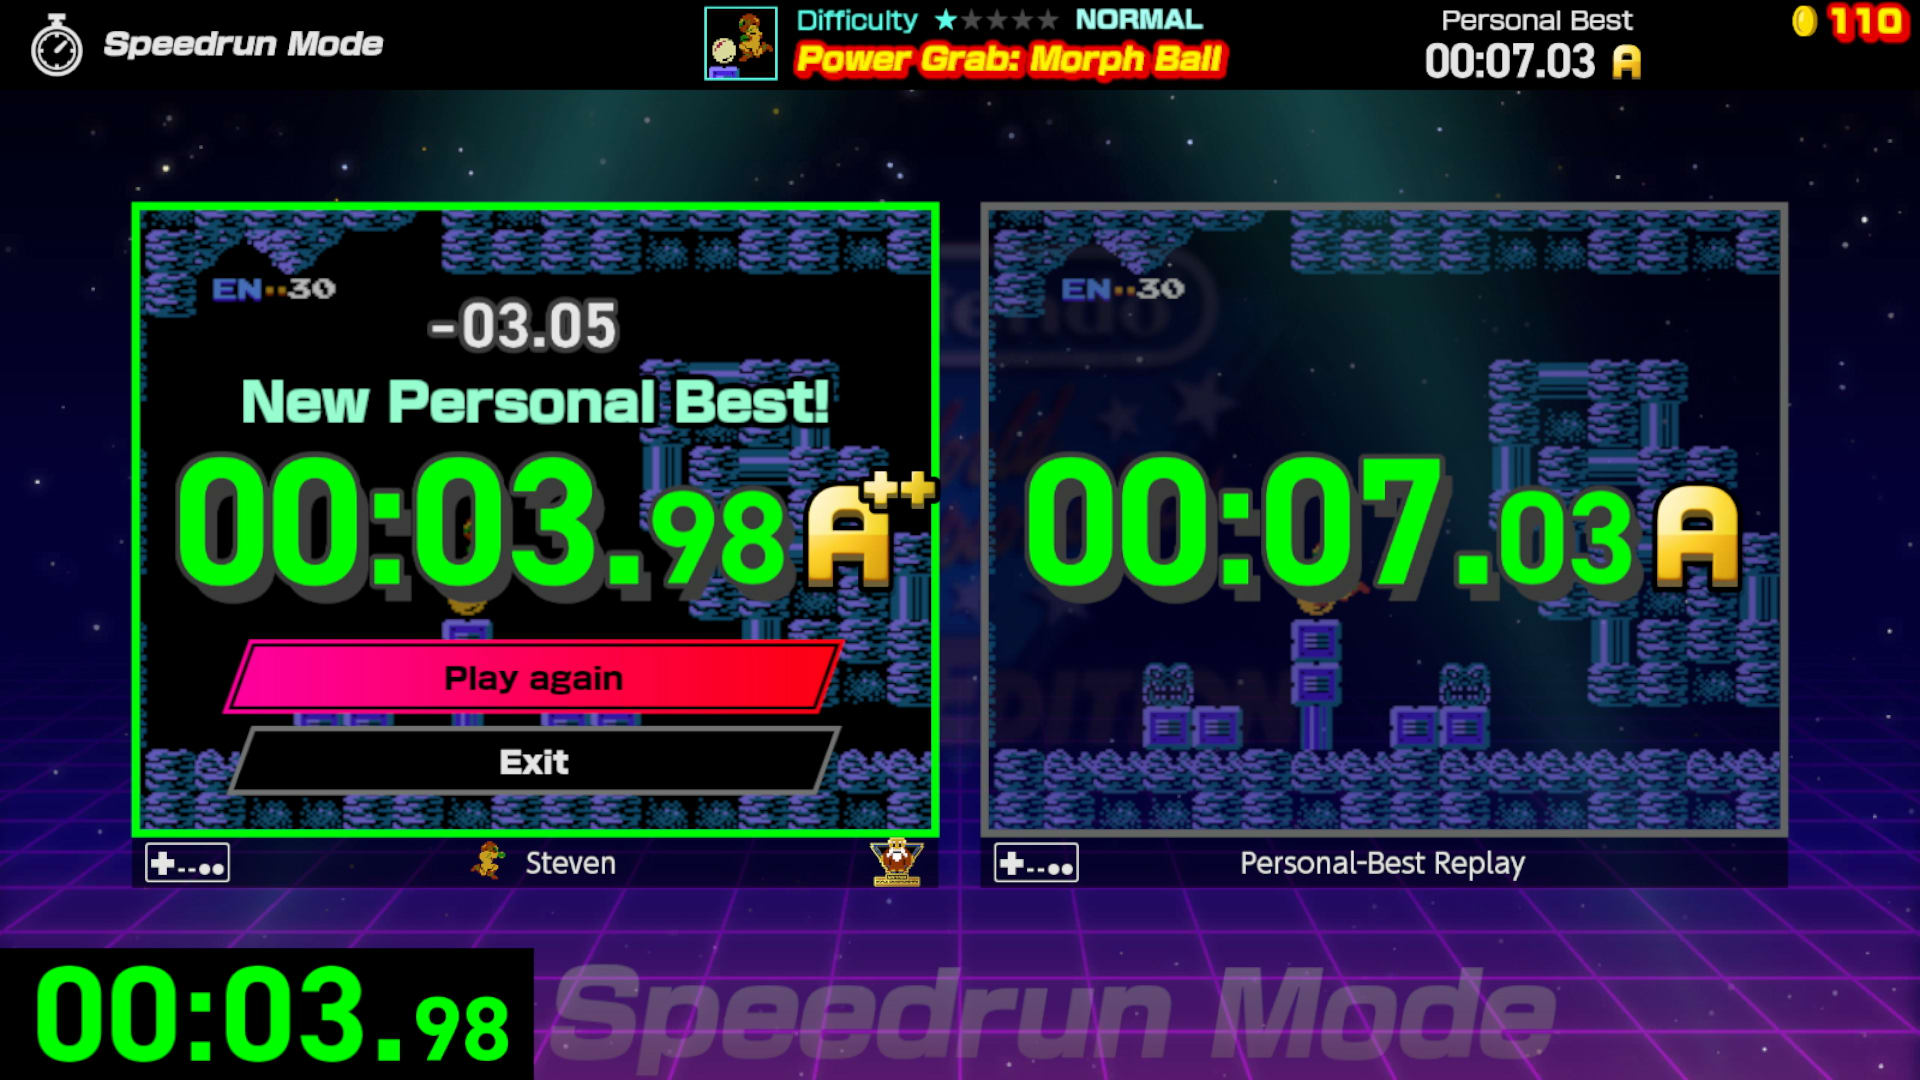 A player sets a new personal best in a Metroid challenge, beating their old record by 3 seconds.